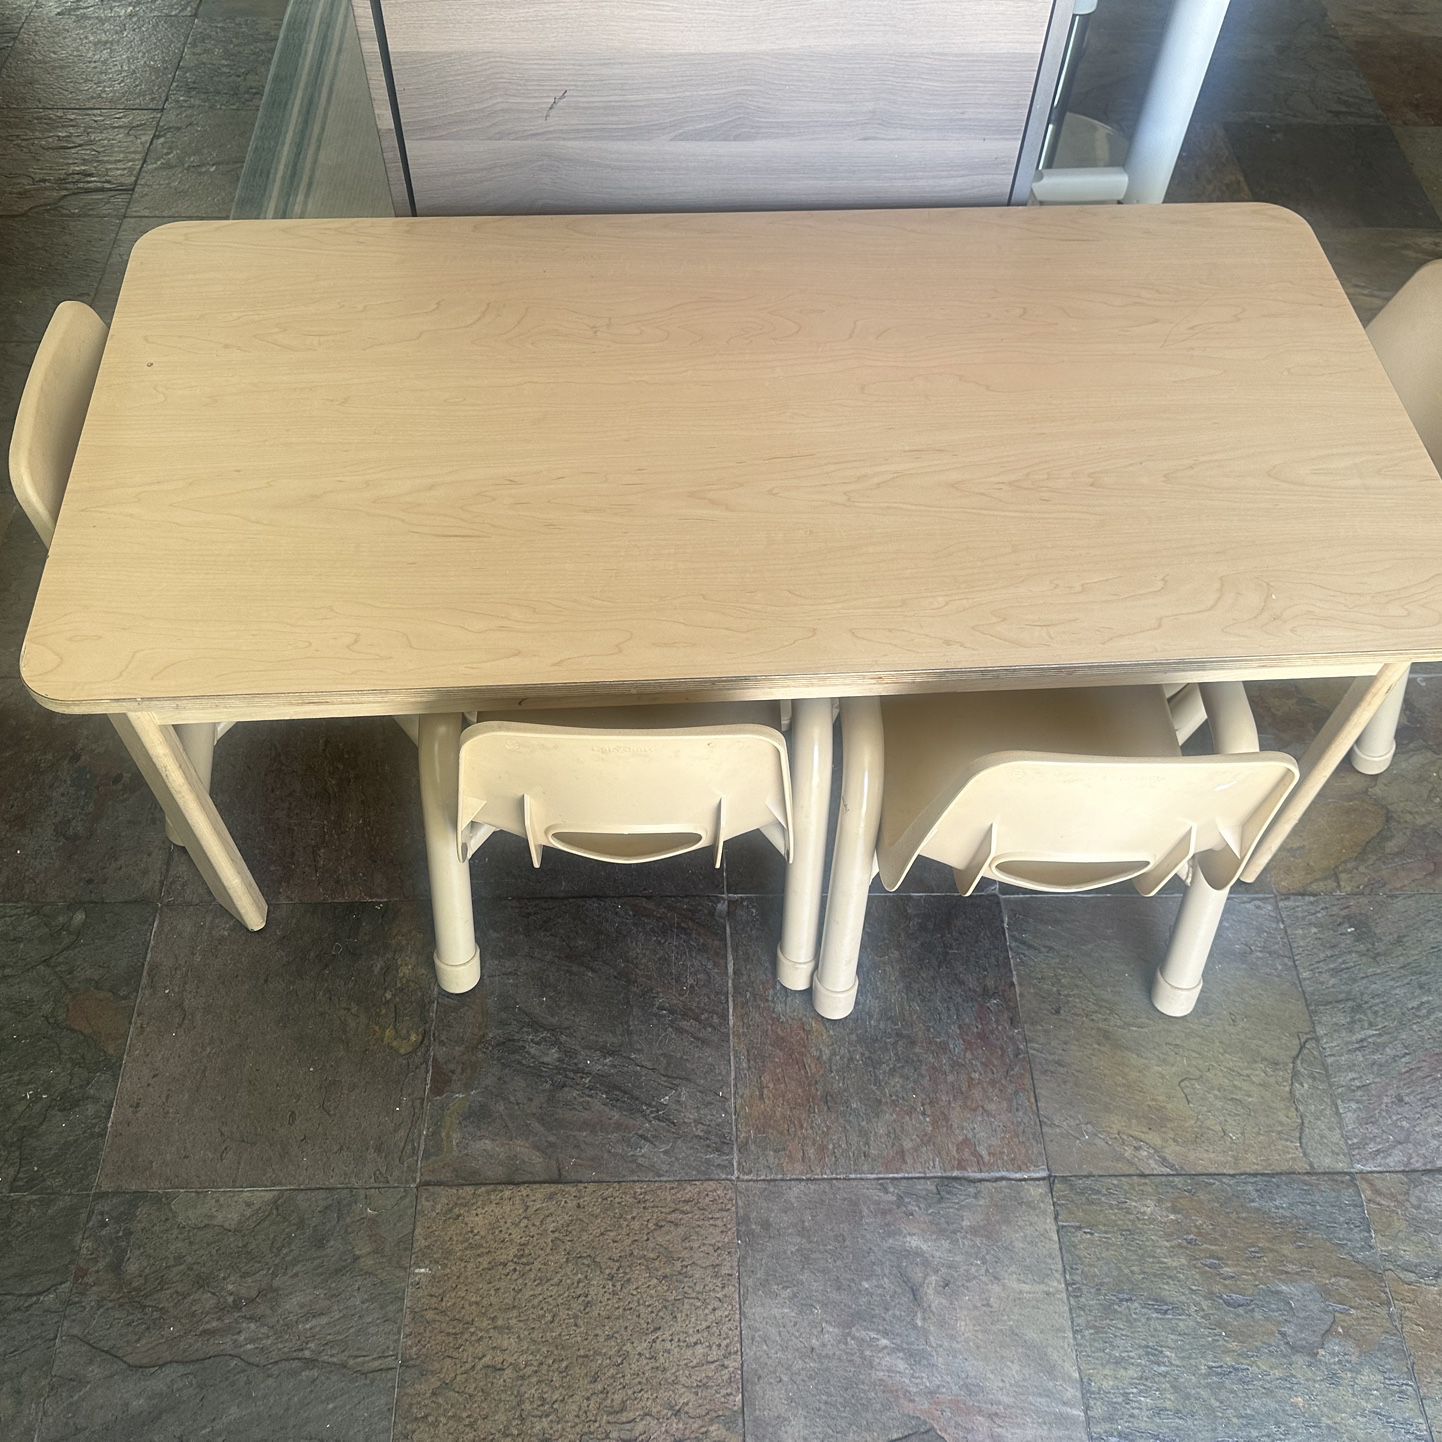 Lakeshore Wooden Table With Chairs Must Go As Soon As Possible